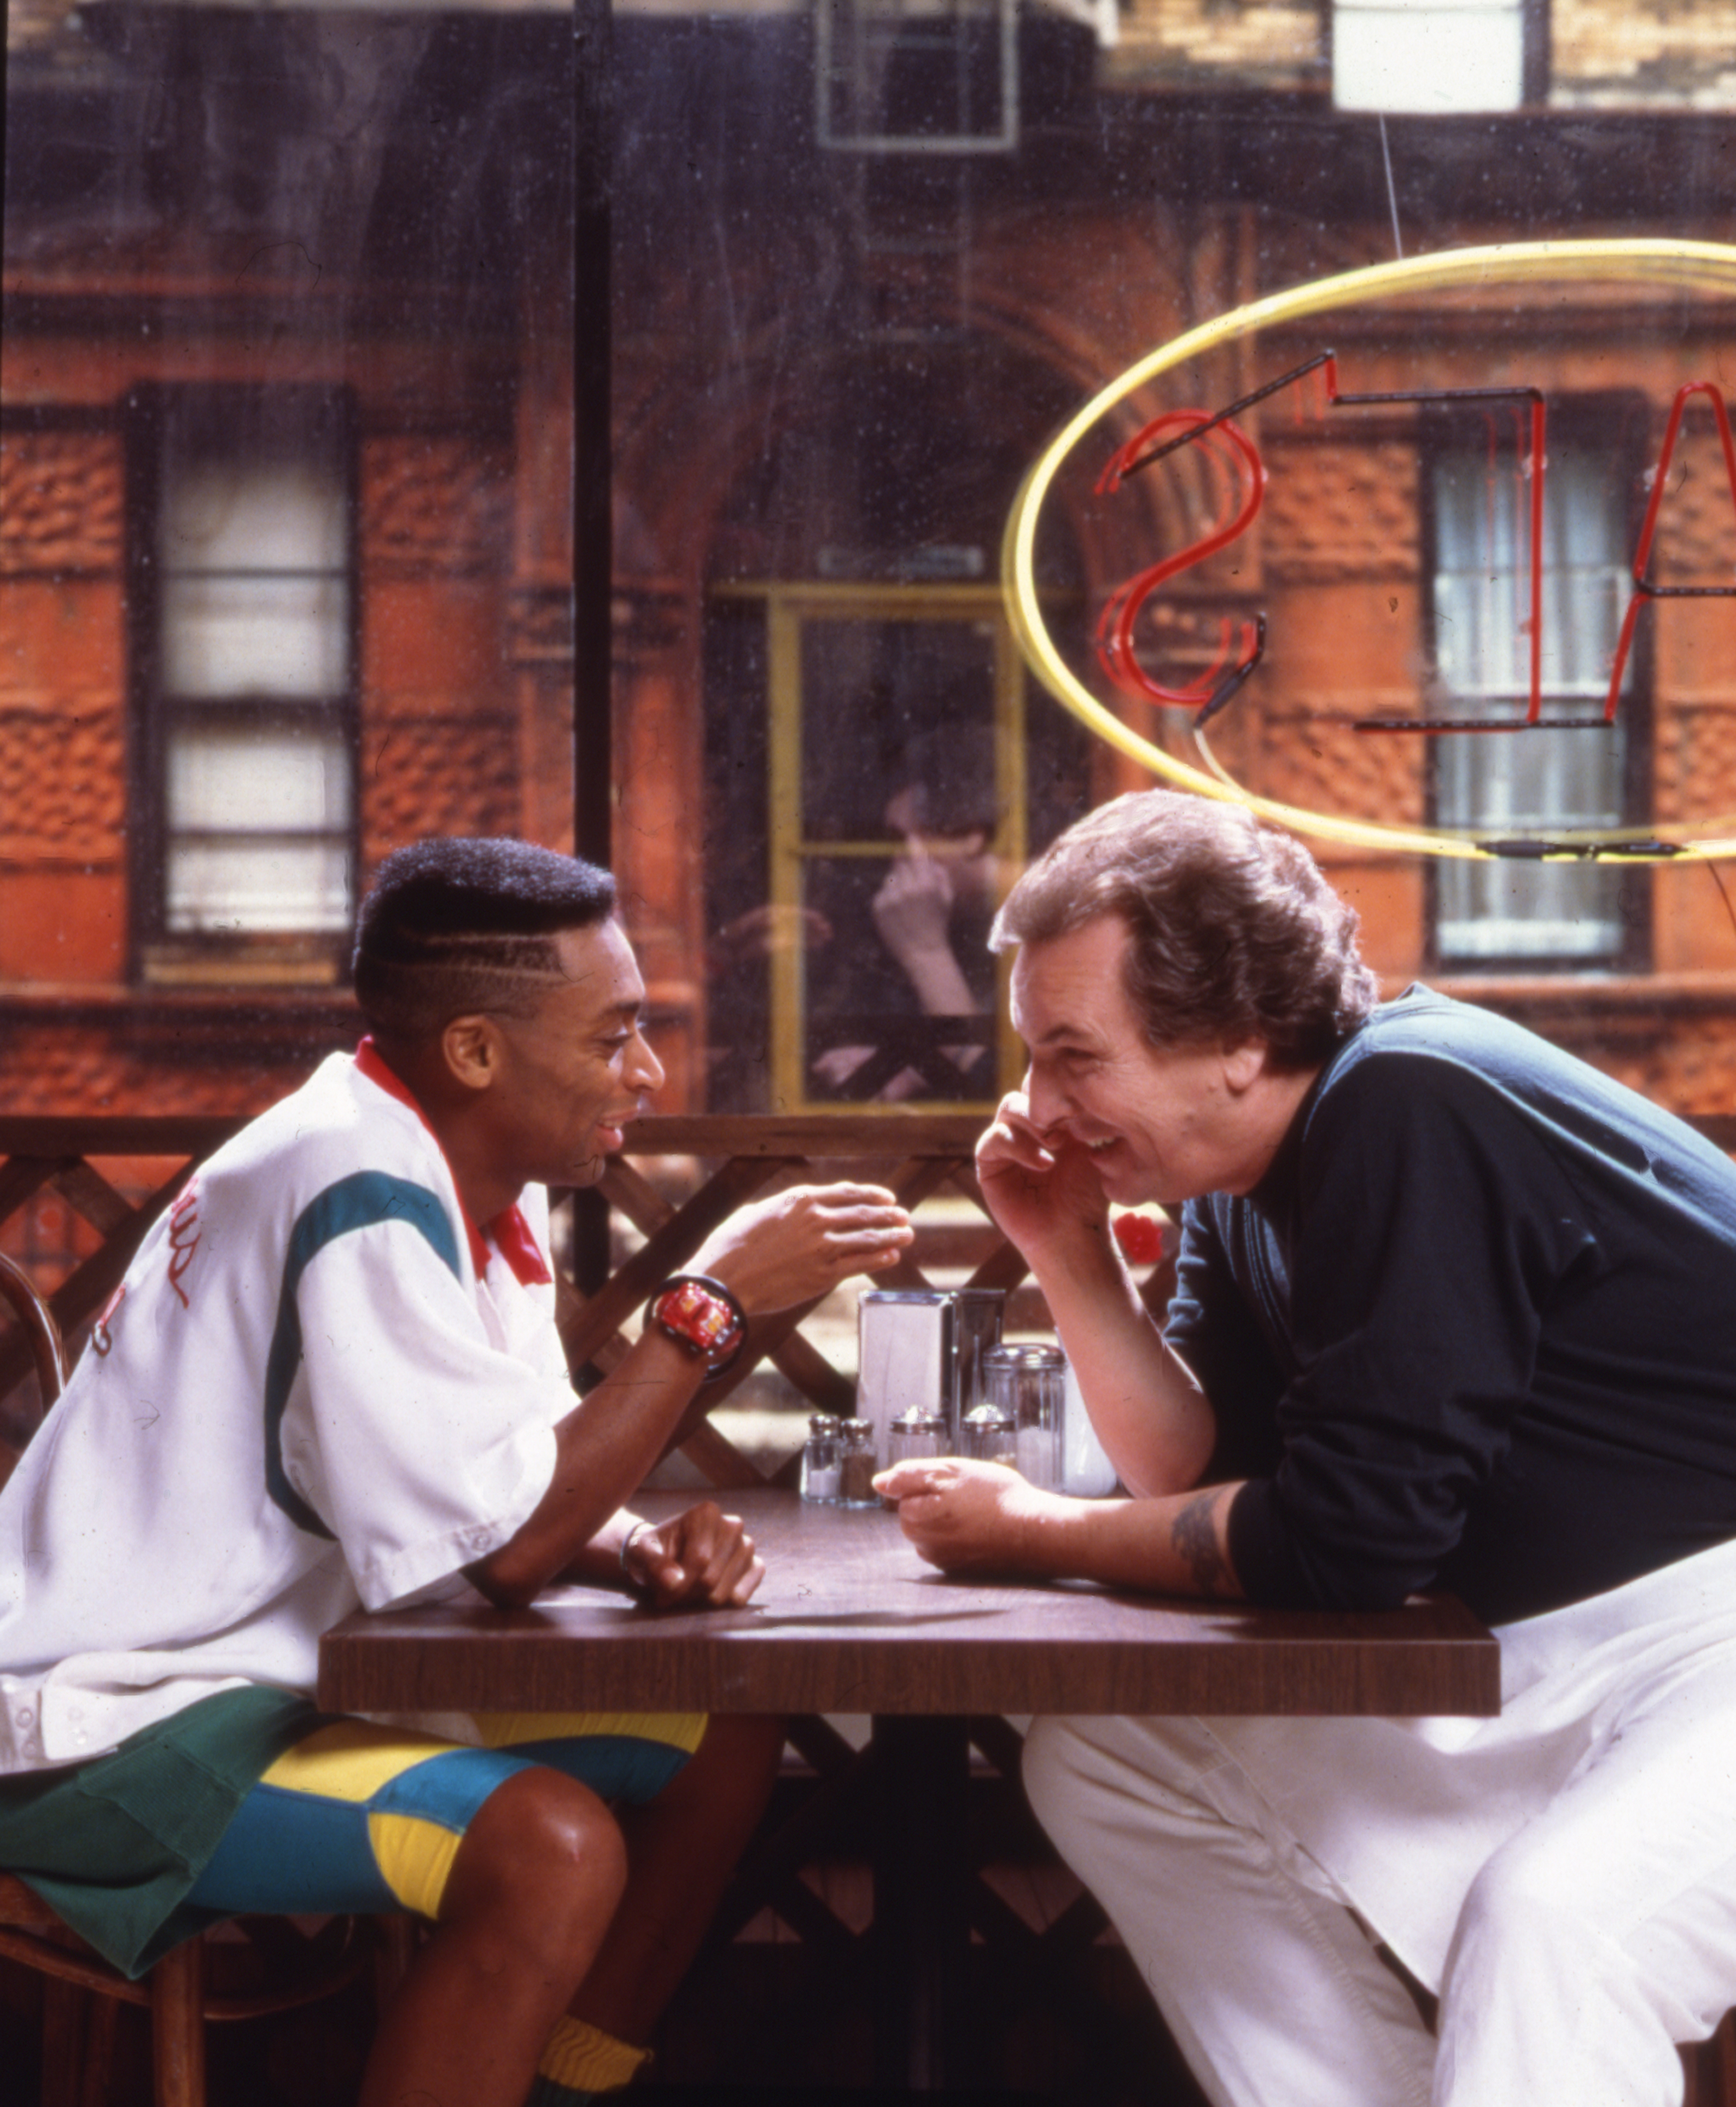 Still of Spike Lee and Danny Aiello in Do the Right Thing (1989)